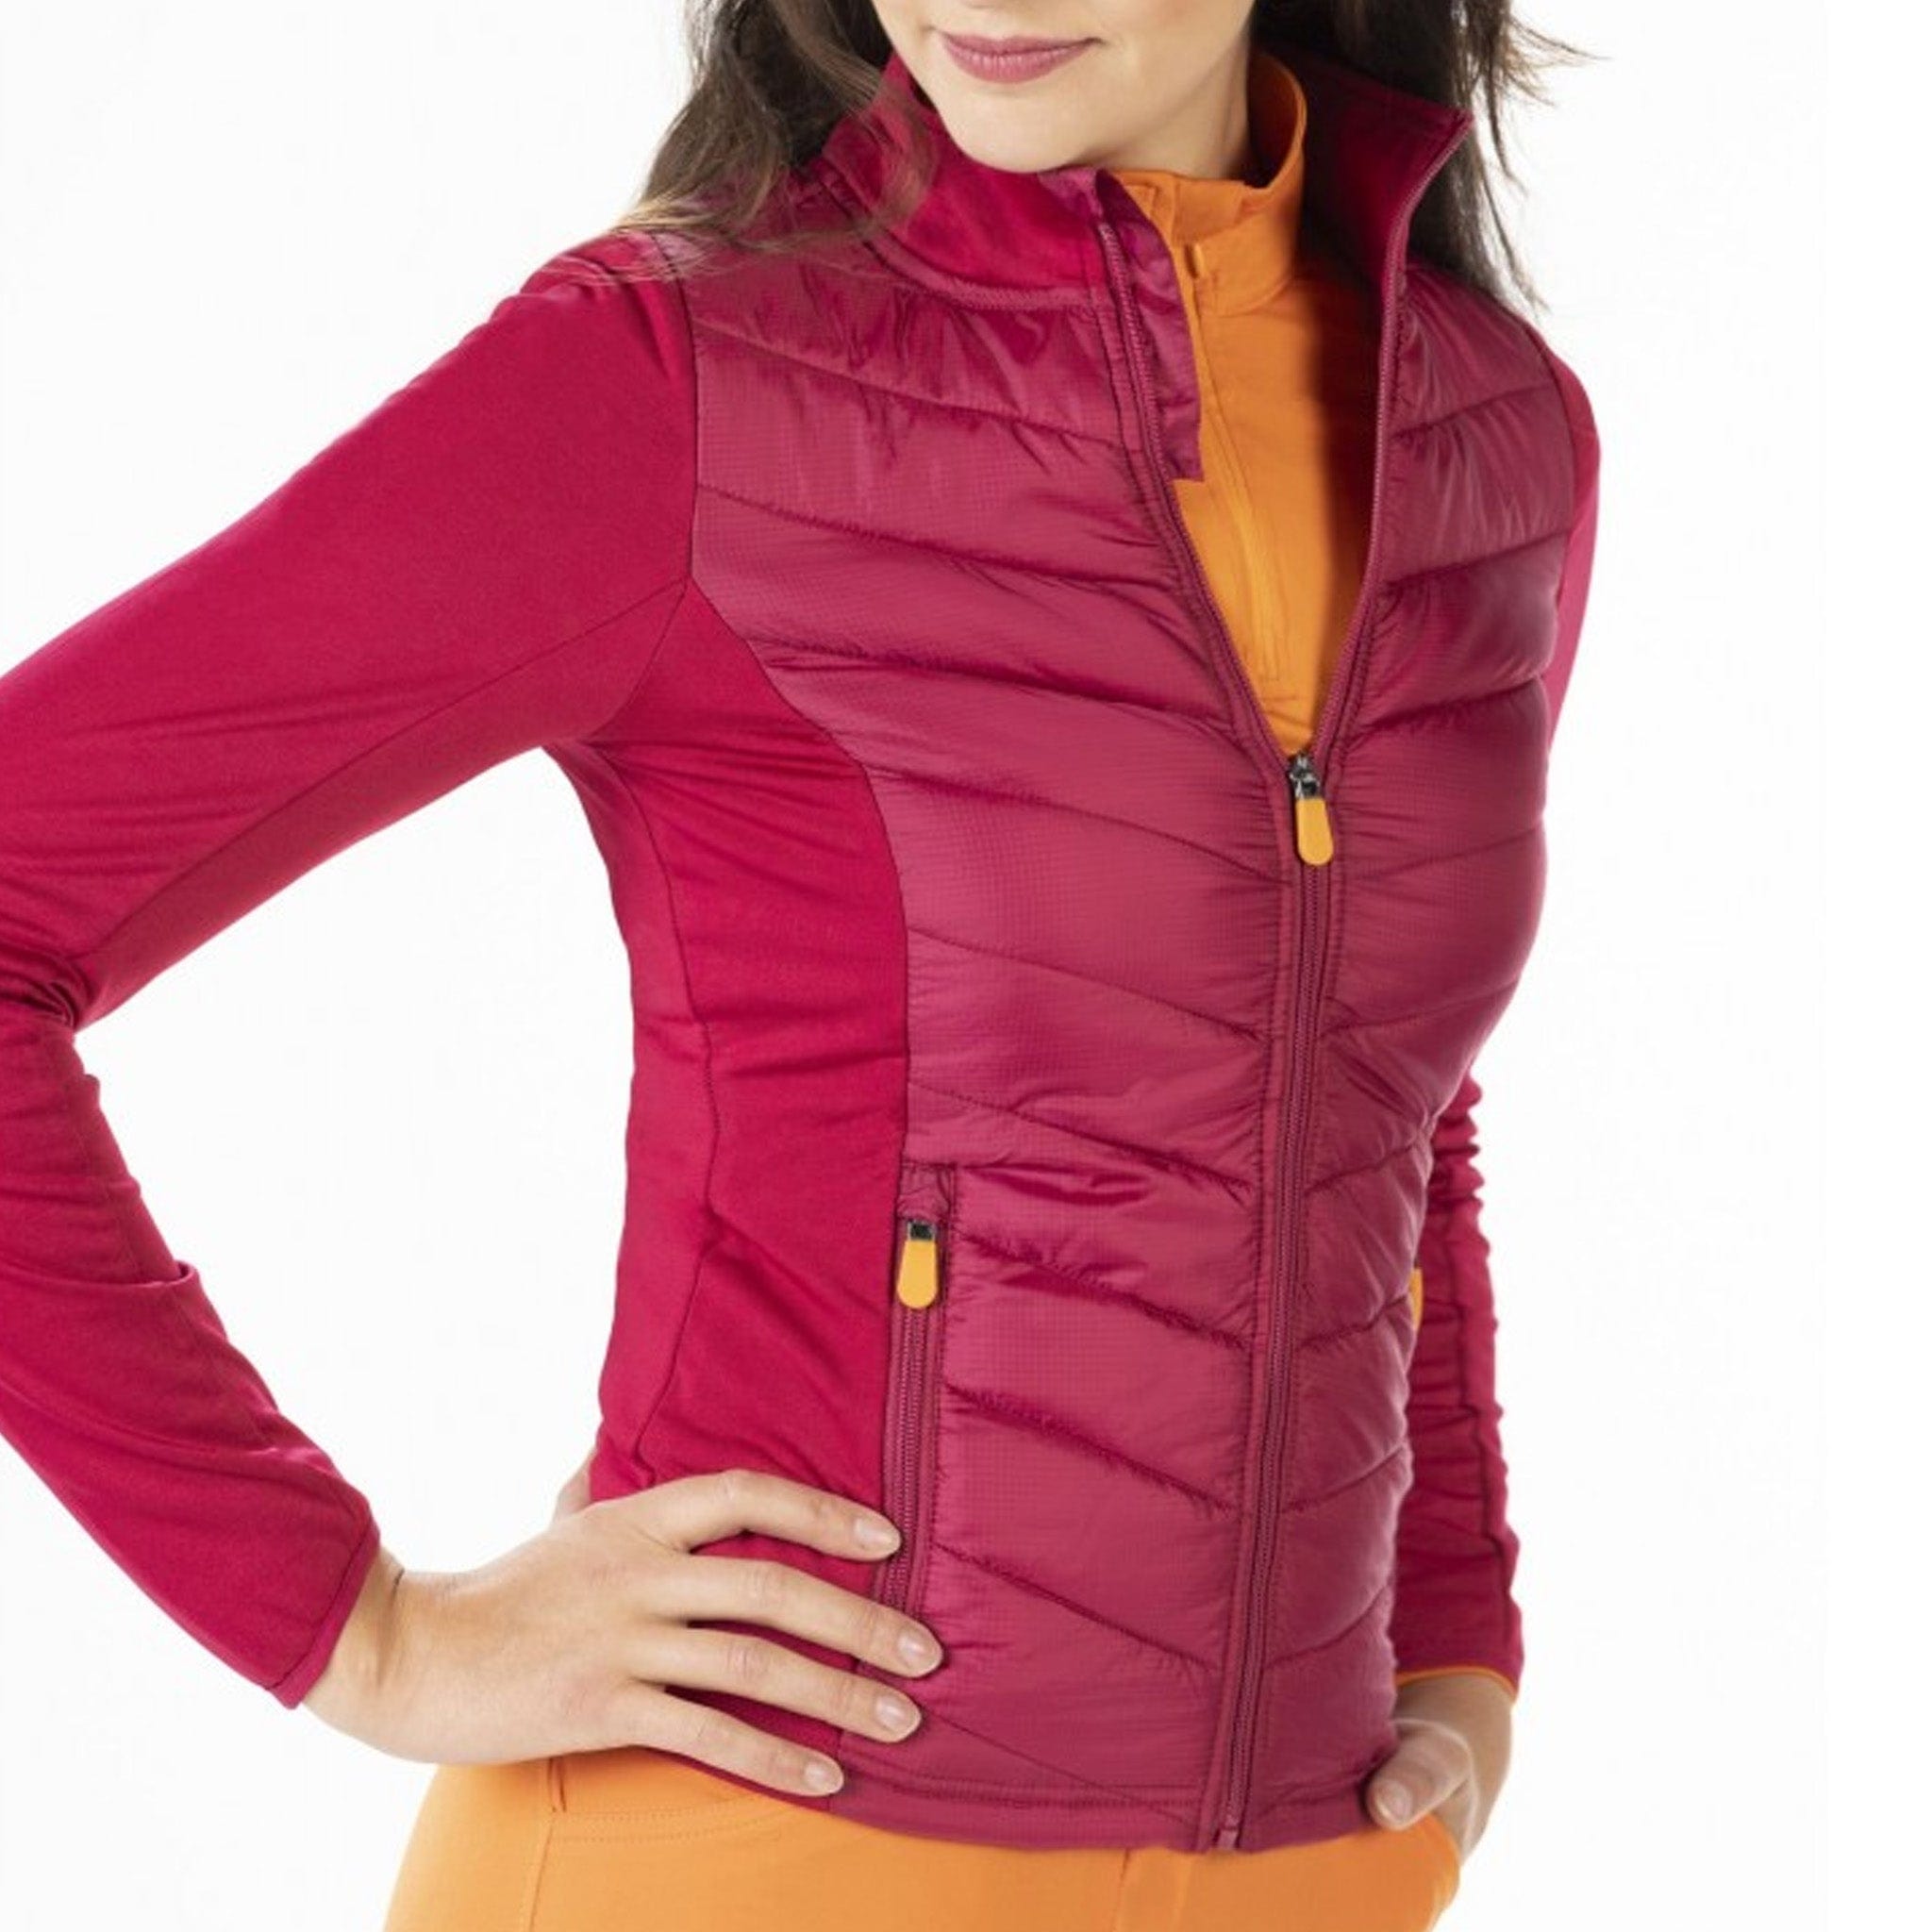 HKM Children's Style Prag Jacket 11315 Cranberry Red Front View On Model